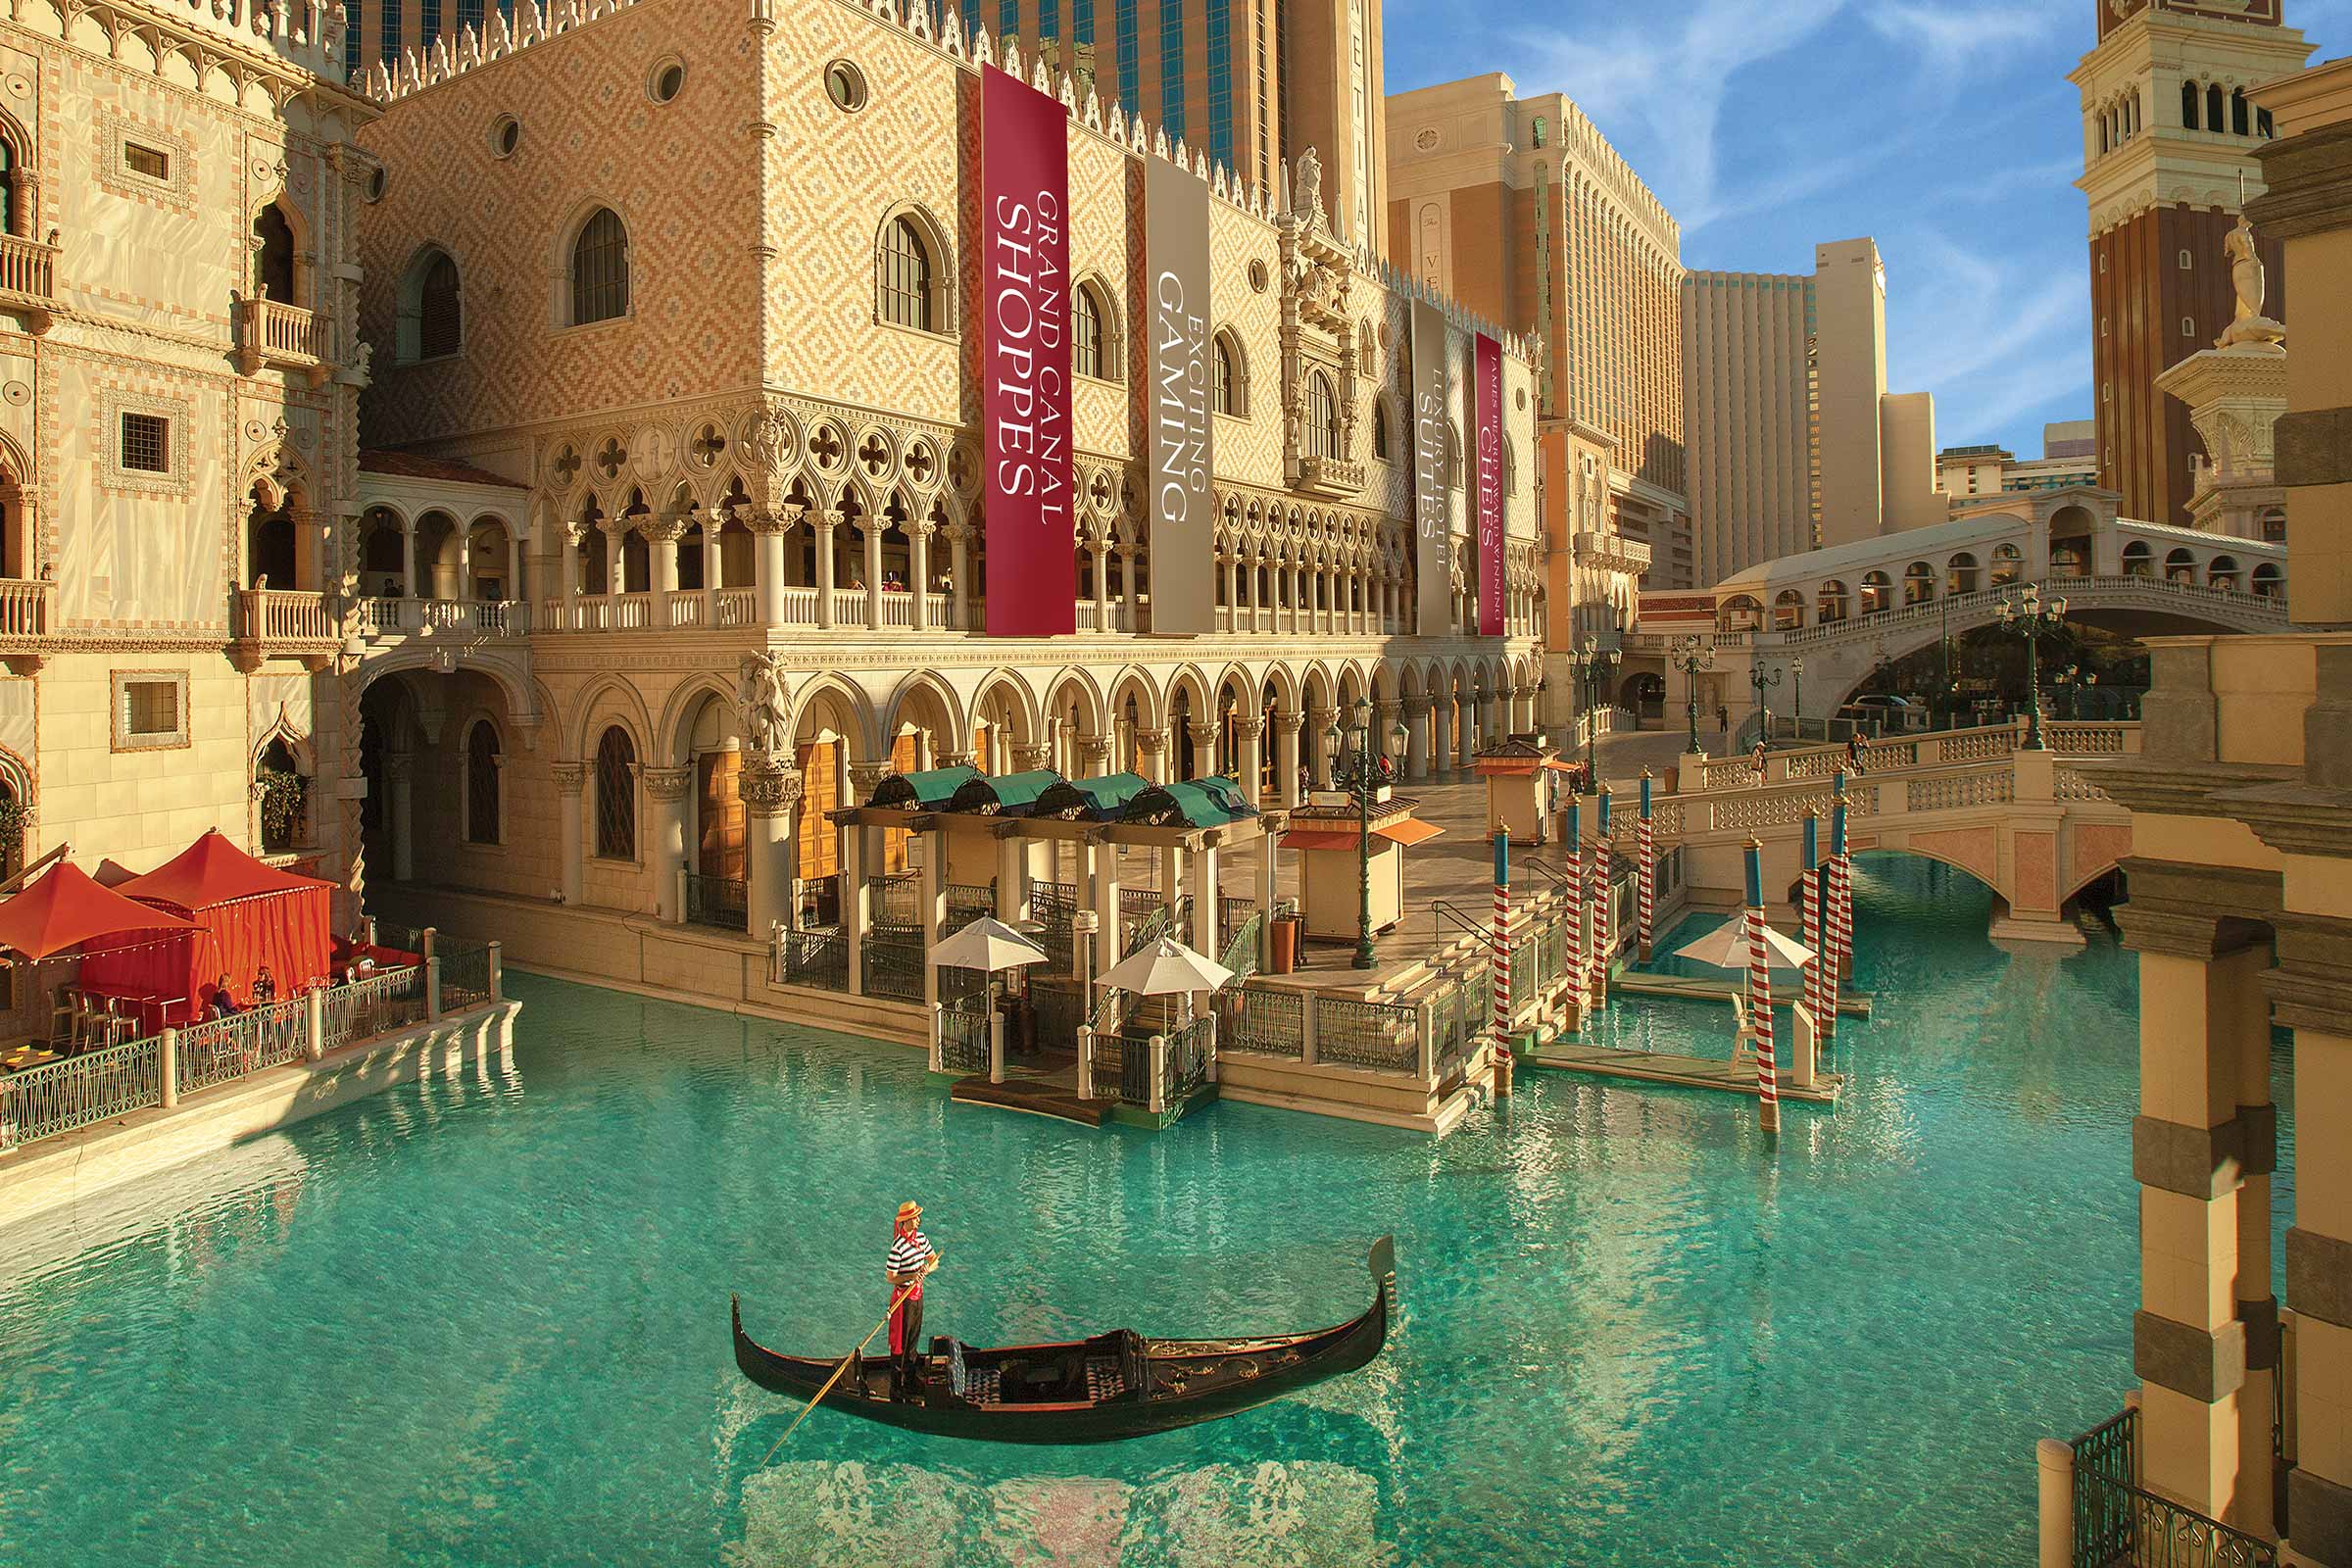 Enjoy views of the Strip from your Gondola